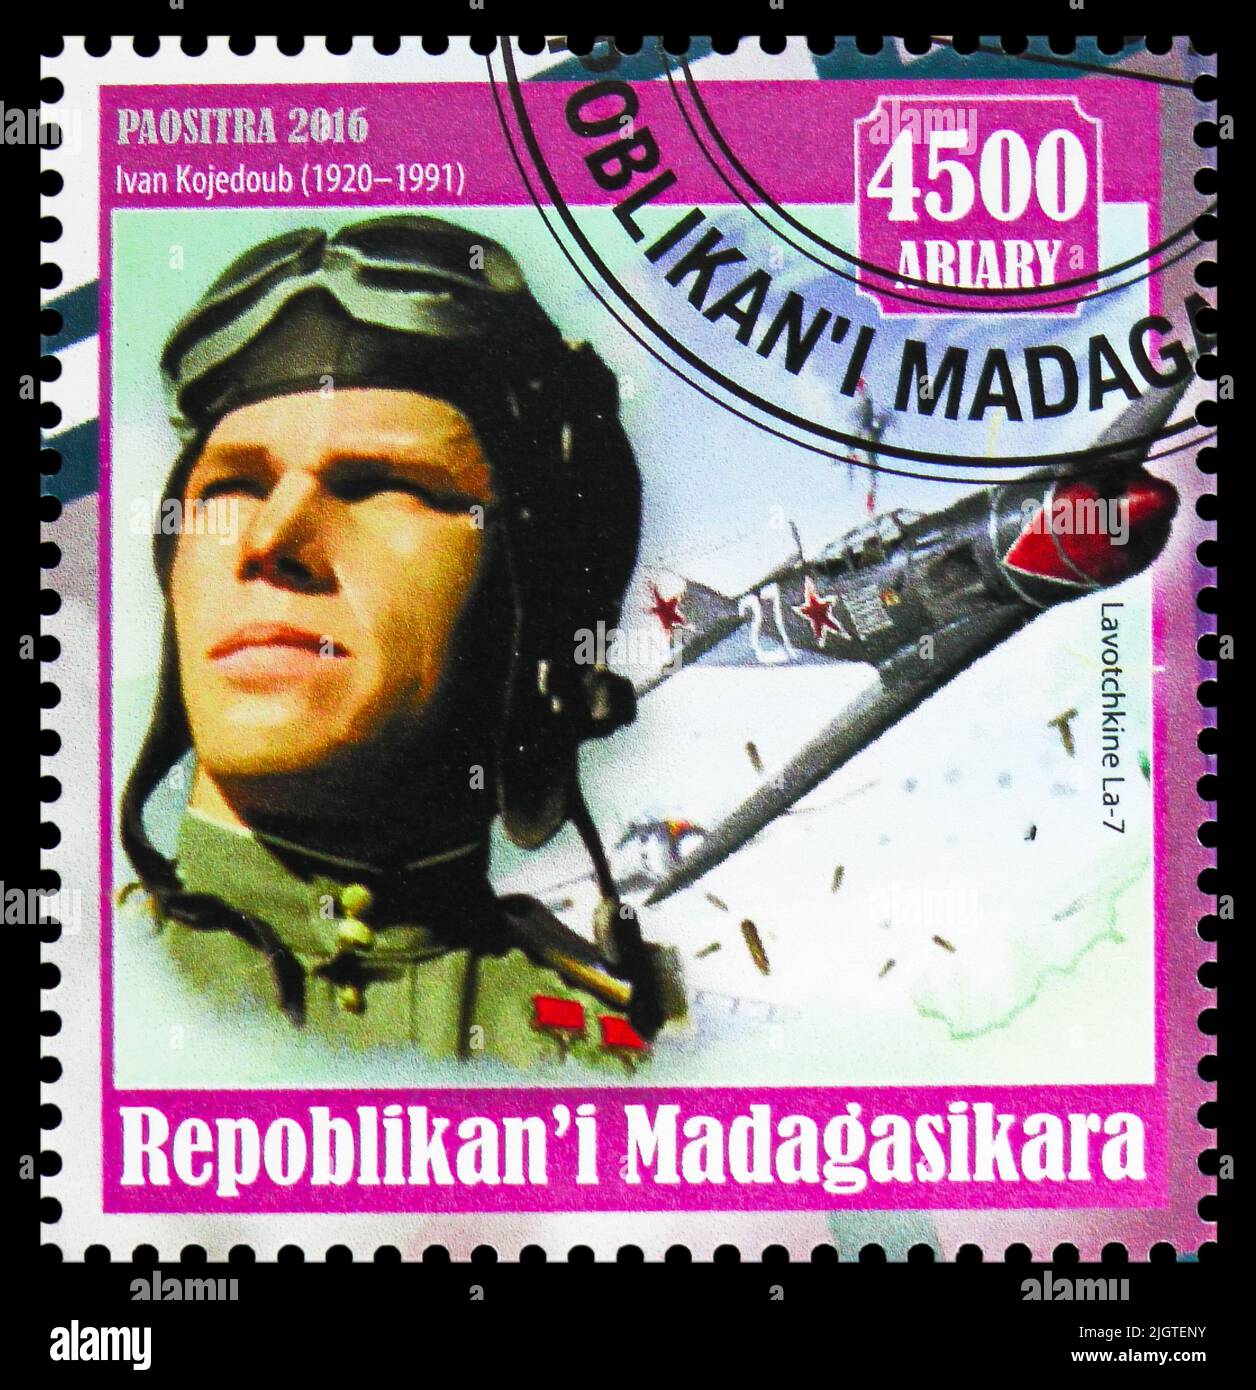 MOSCOW, RUSSIA - JUNE 17, 2022: Postage stamp printed in Madagascar shows Ivan Kozhedub, The aces of the second world war serie, circa 2016 Stock Photo